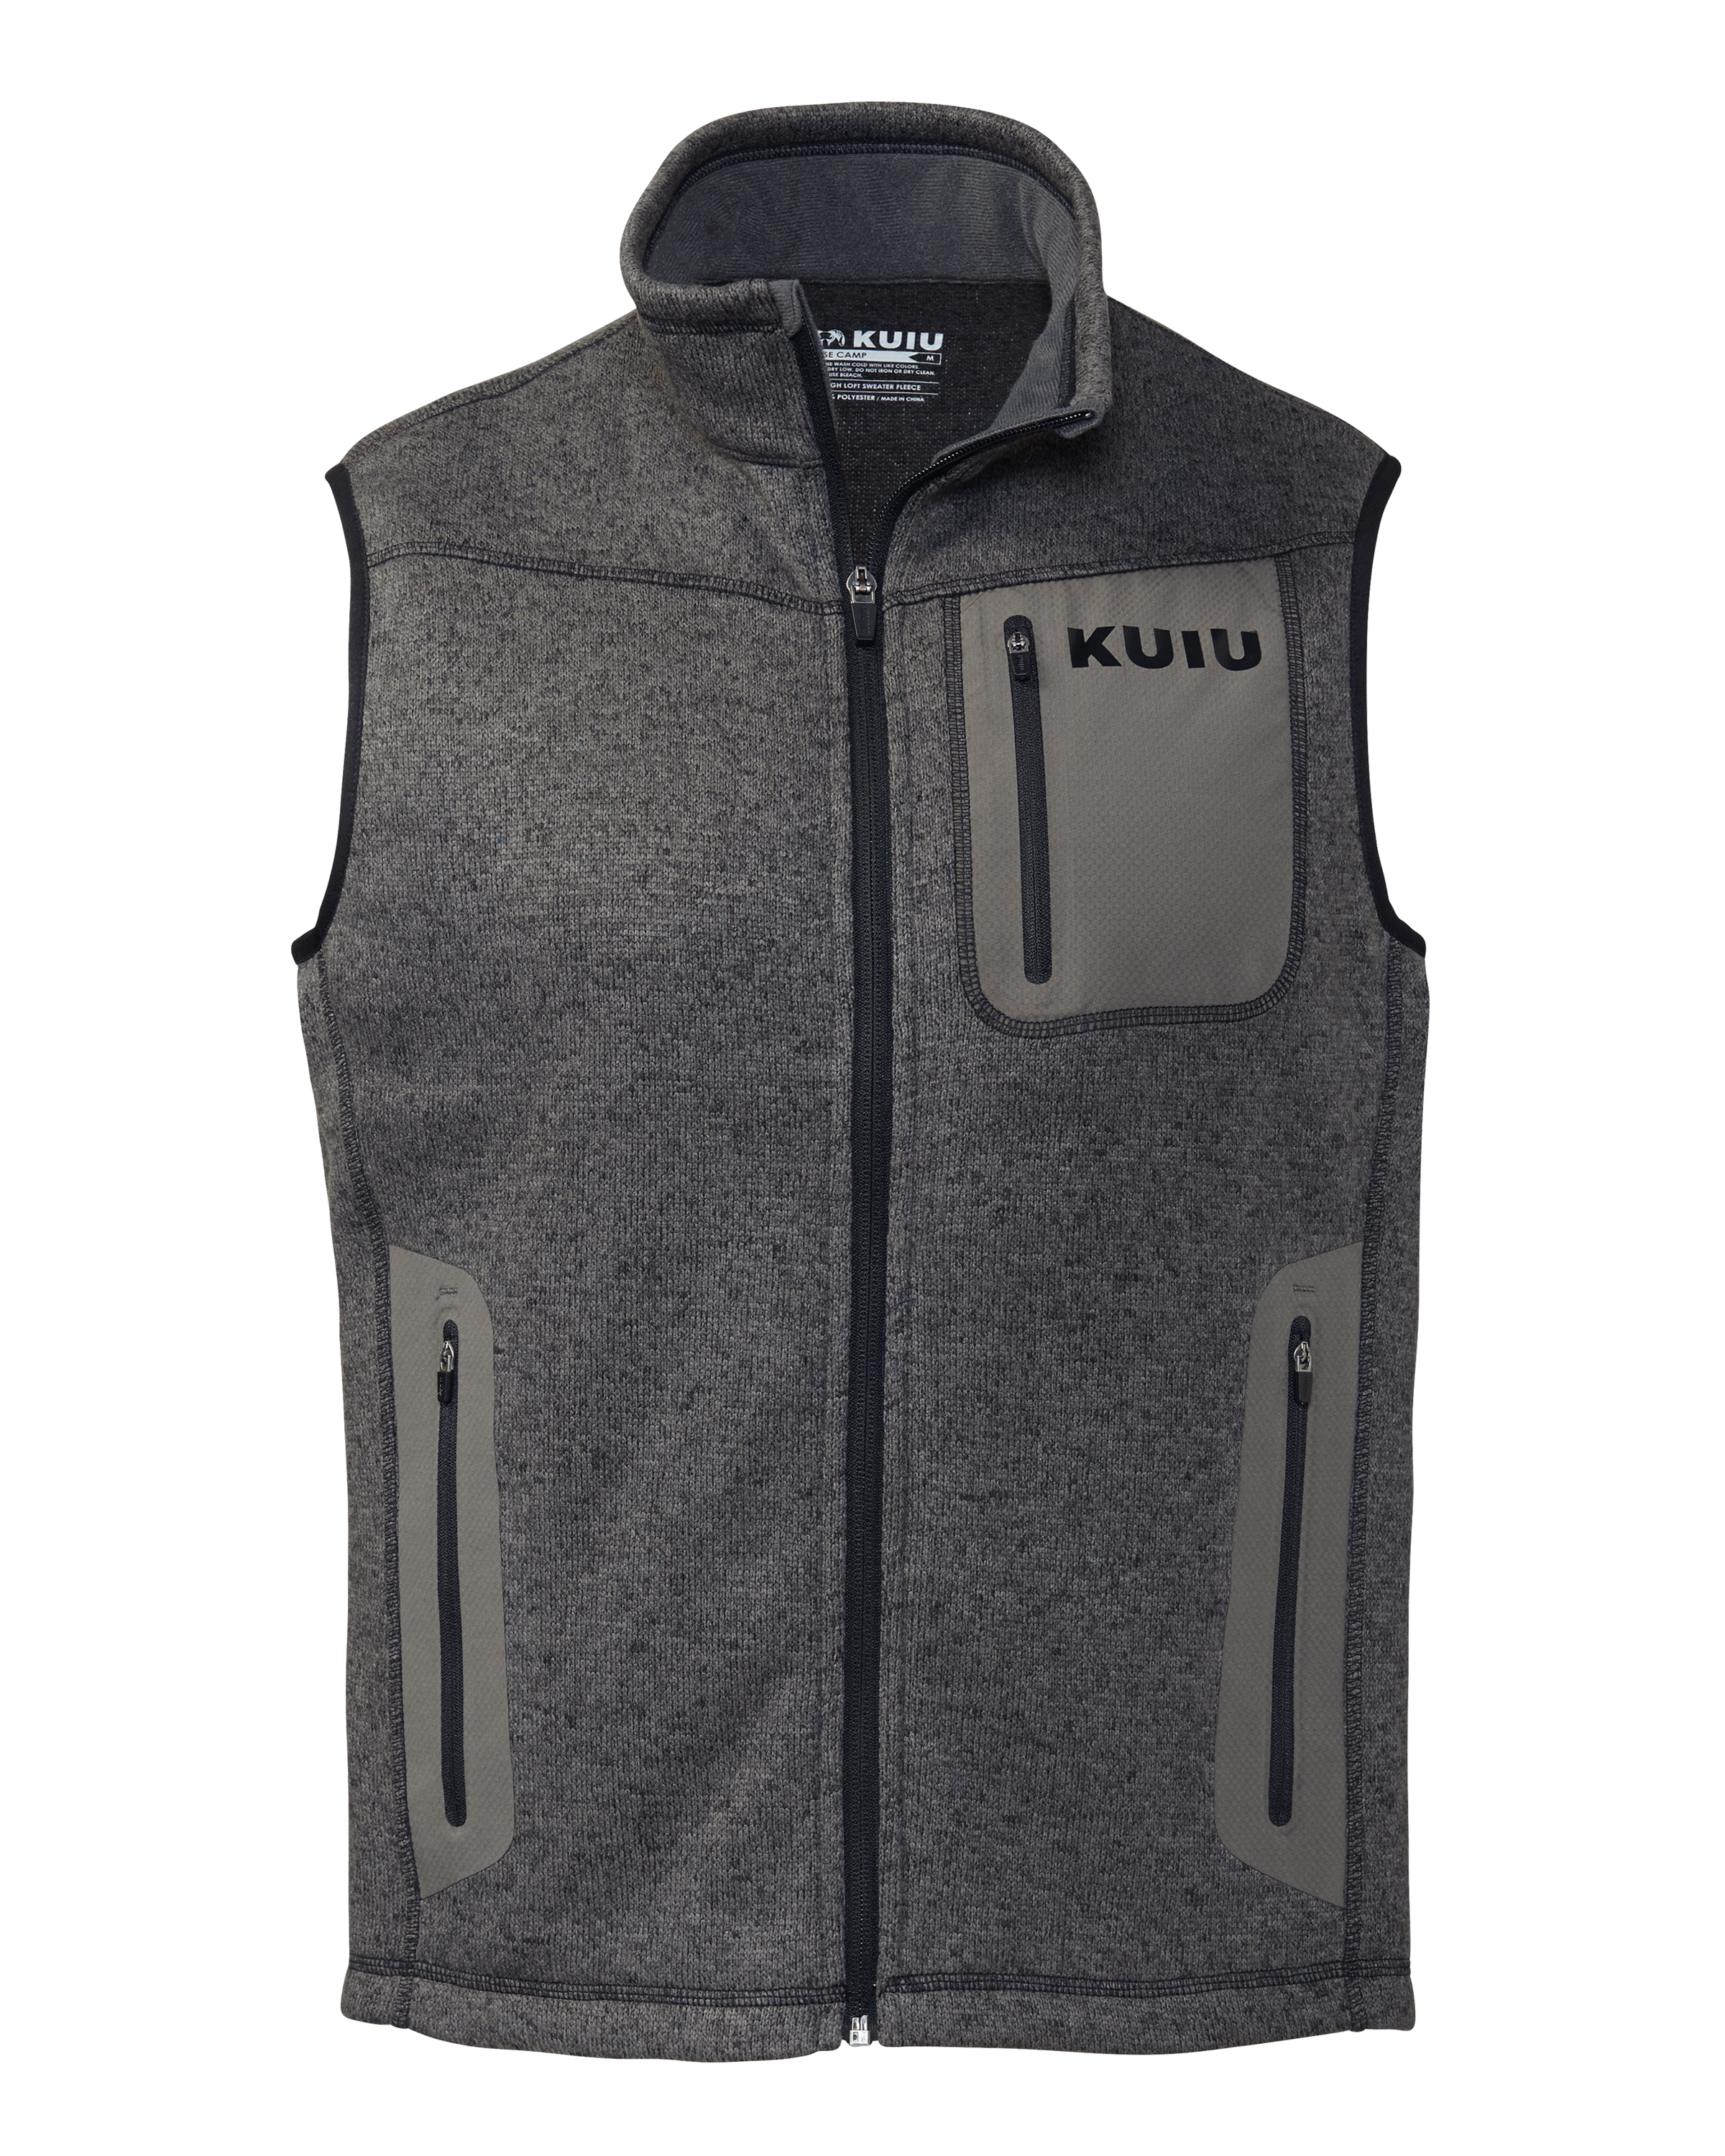 KUIU Base Camp Sweater Vest in Charcoal | Size 2XL